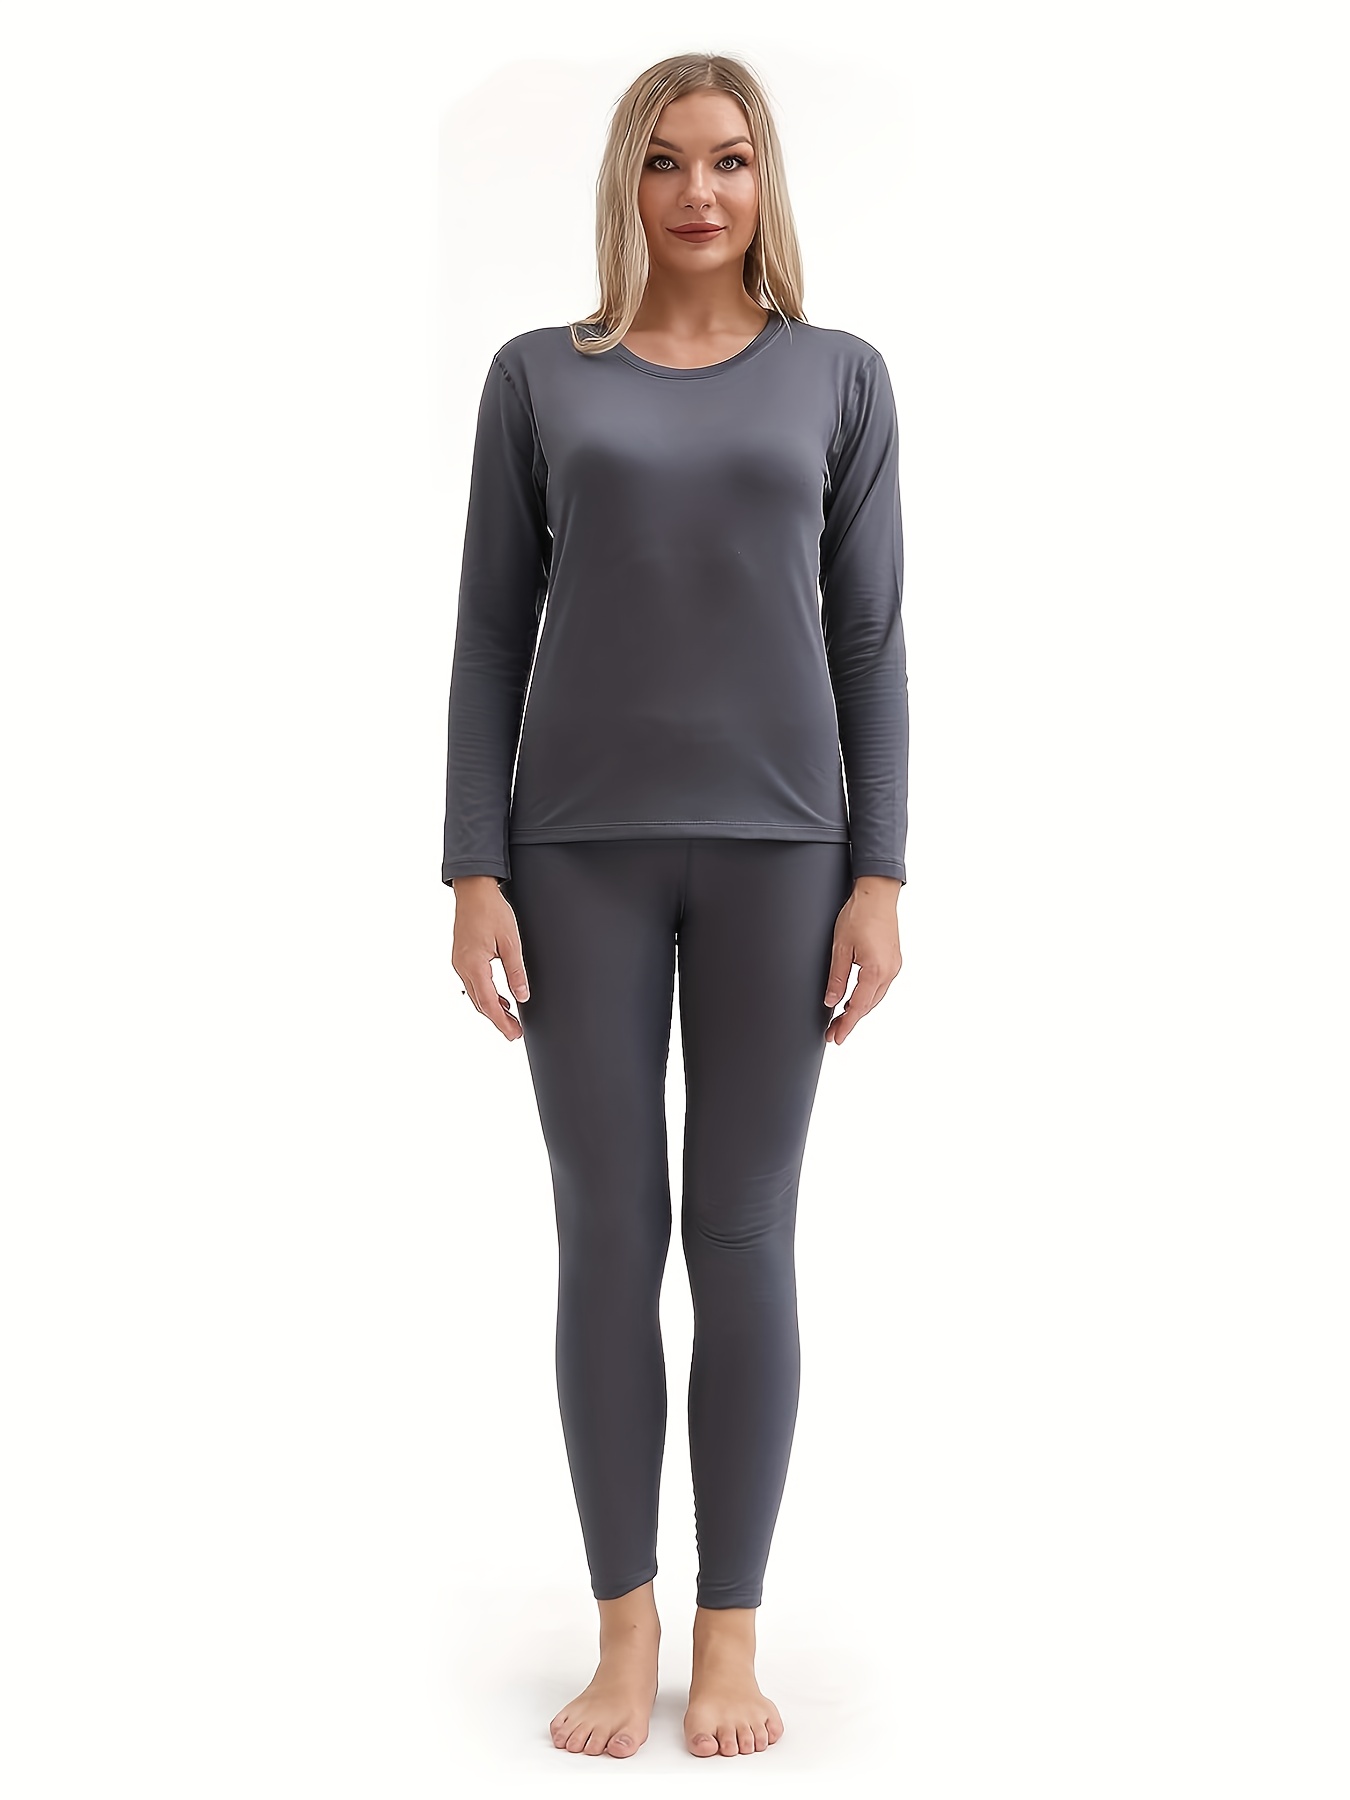 Thermal Underwear for Women, Winter Warm Long Johns Thermal Sets Cold  Weather Gear Base Layer for Skiing Running